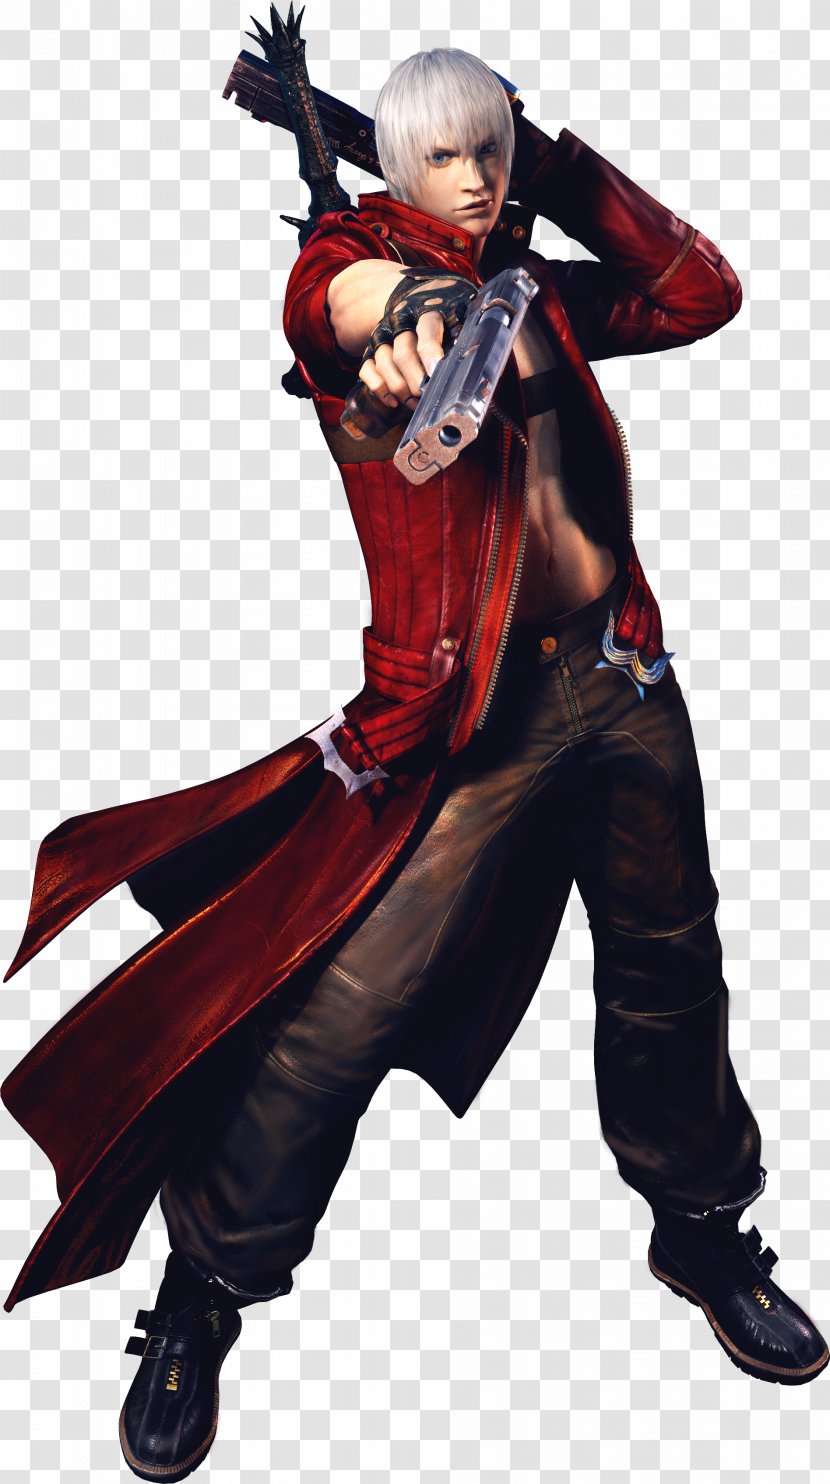 Devil May Cry 3 Dante S Awakening Dmc 2 Cry The Animated Series Capcom Ra Transparent Png The anime was originally announced at the tokyo game show on september 22, 2006, with plans to release twelve episodes of the series. pnghut com